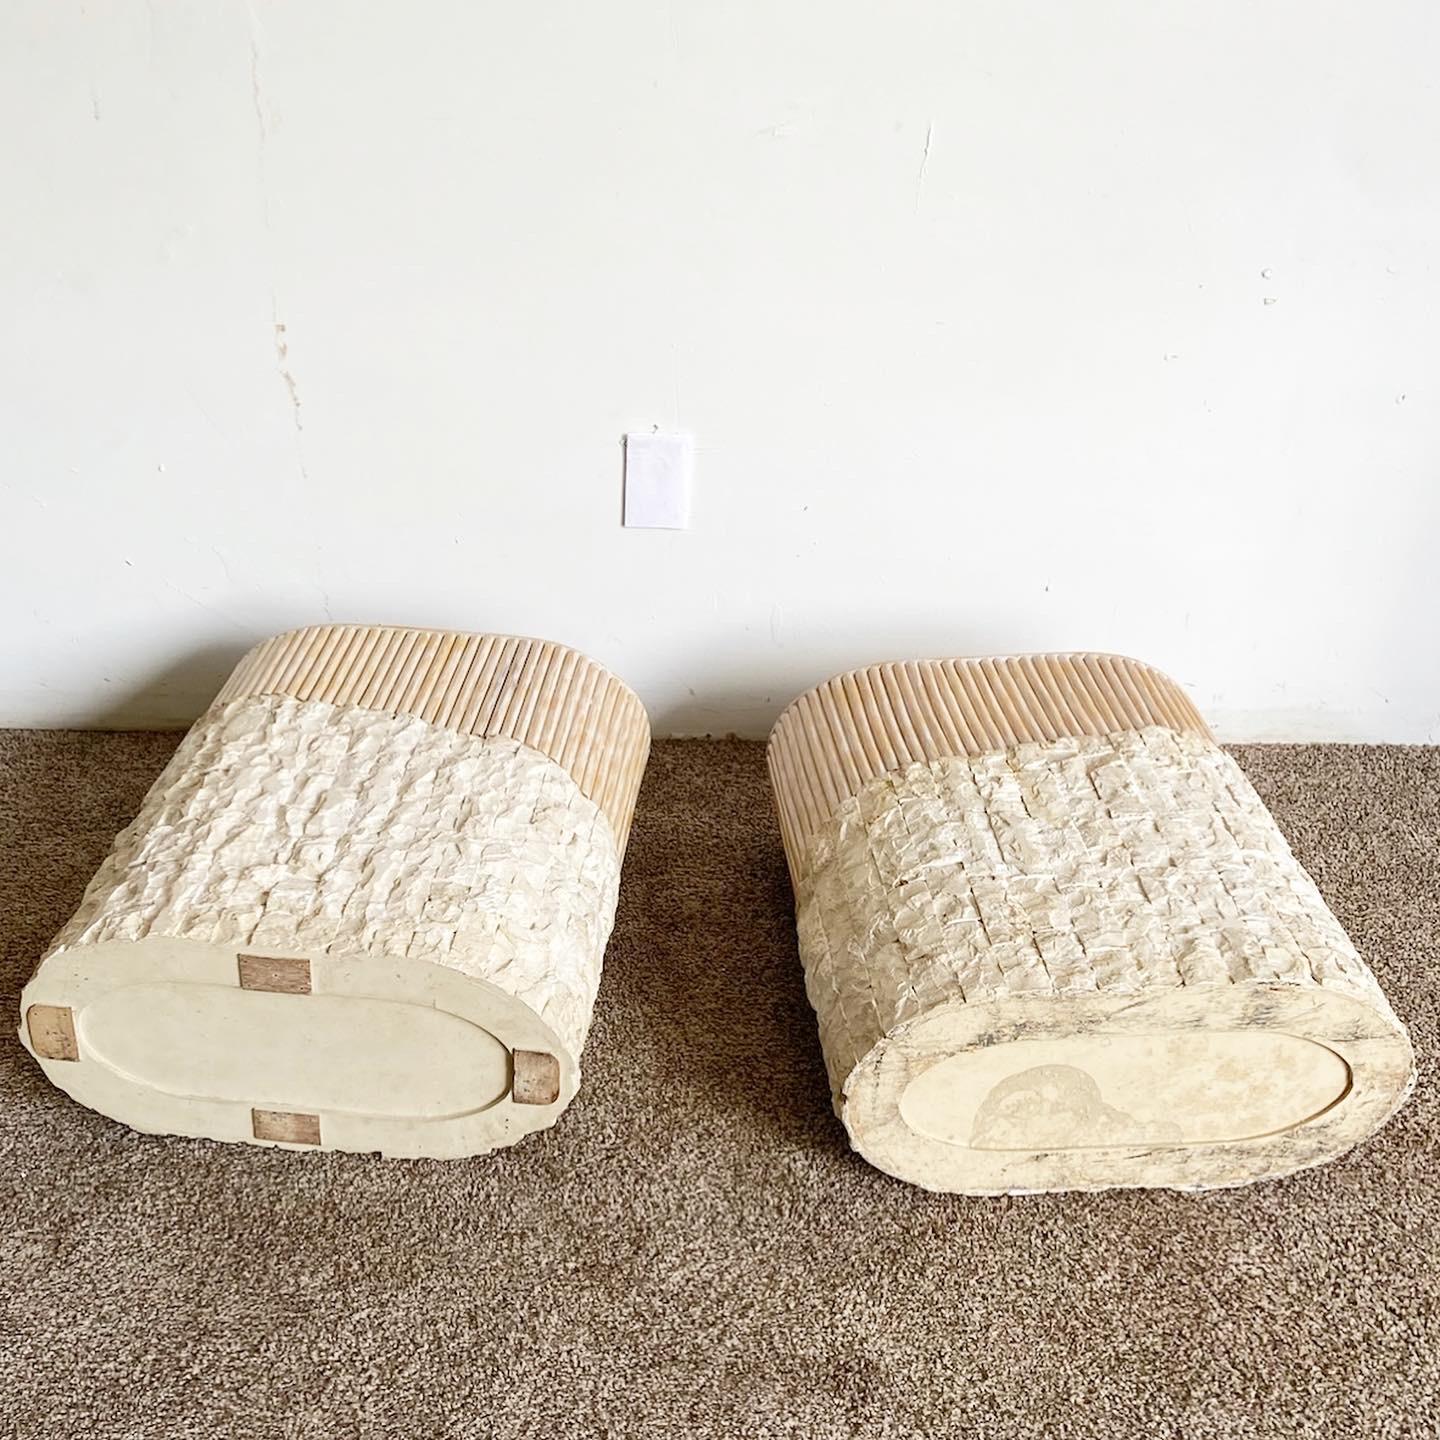 Boho Chic Tessellated Stone and Split Reed Pedestals, a Pair For Sale 4